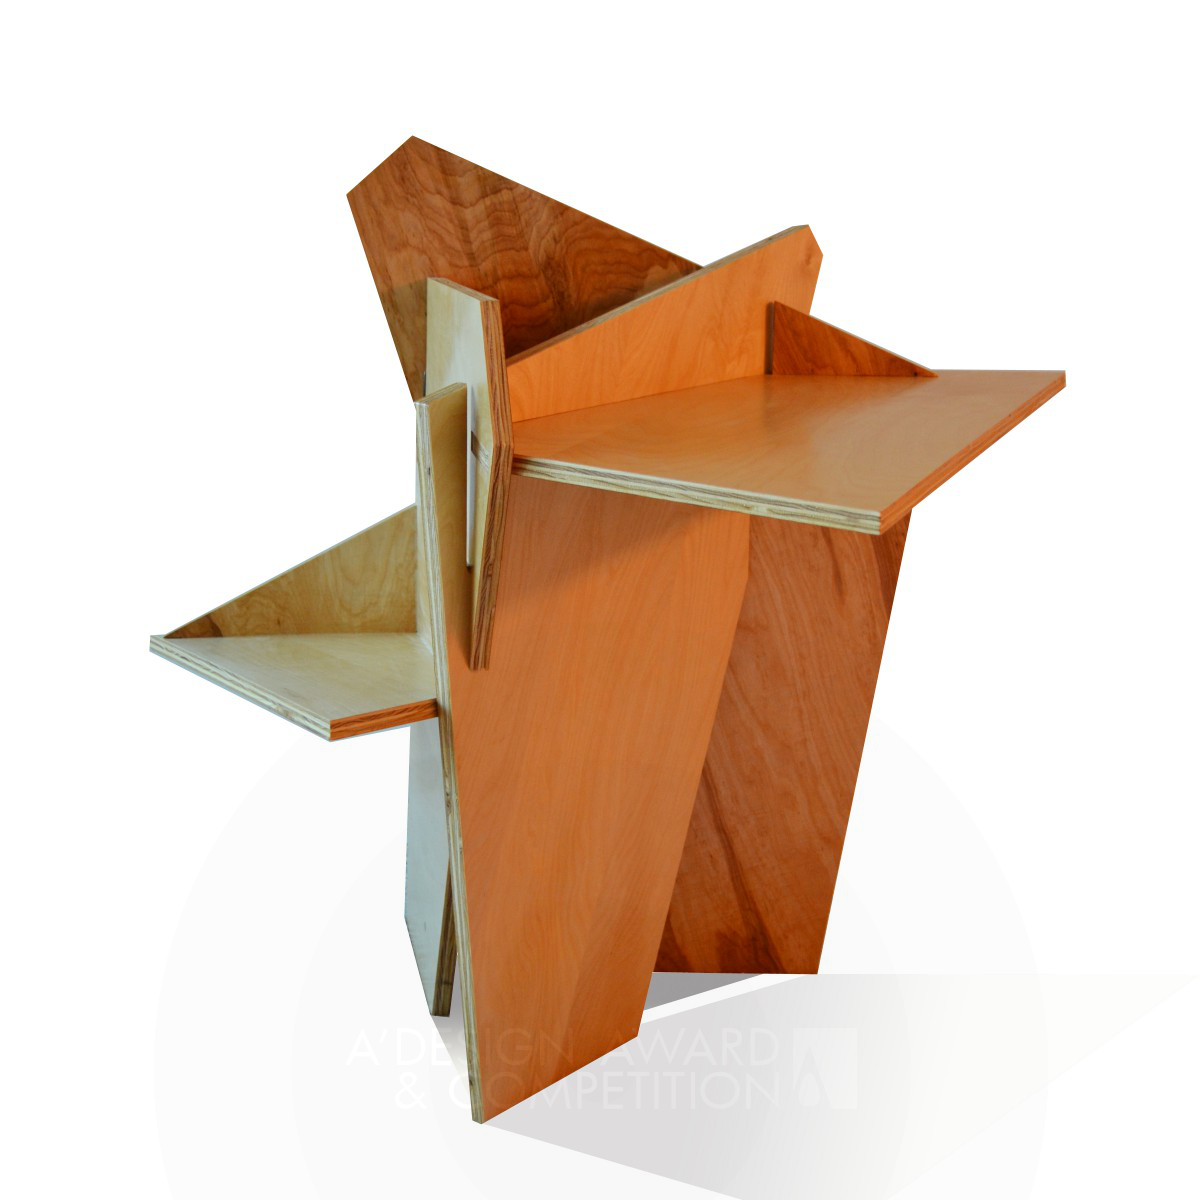 The Origami Rose <b>Multifunctional Table